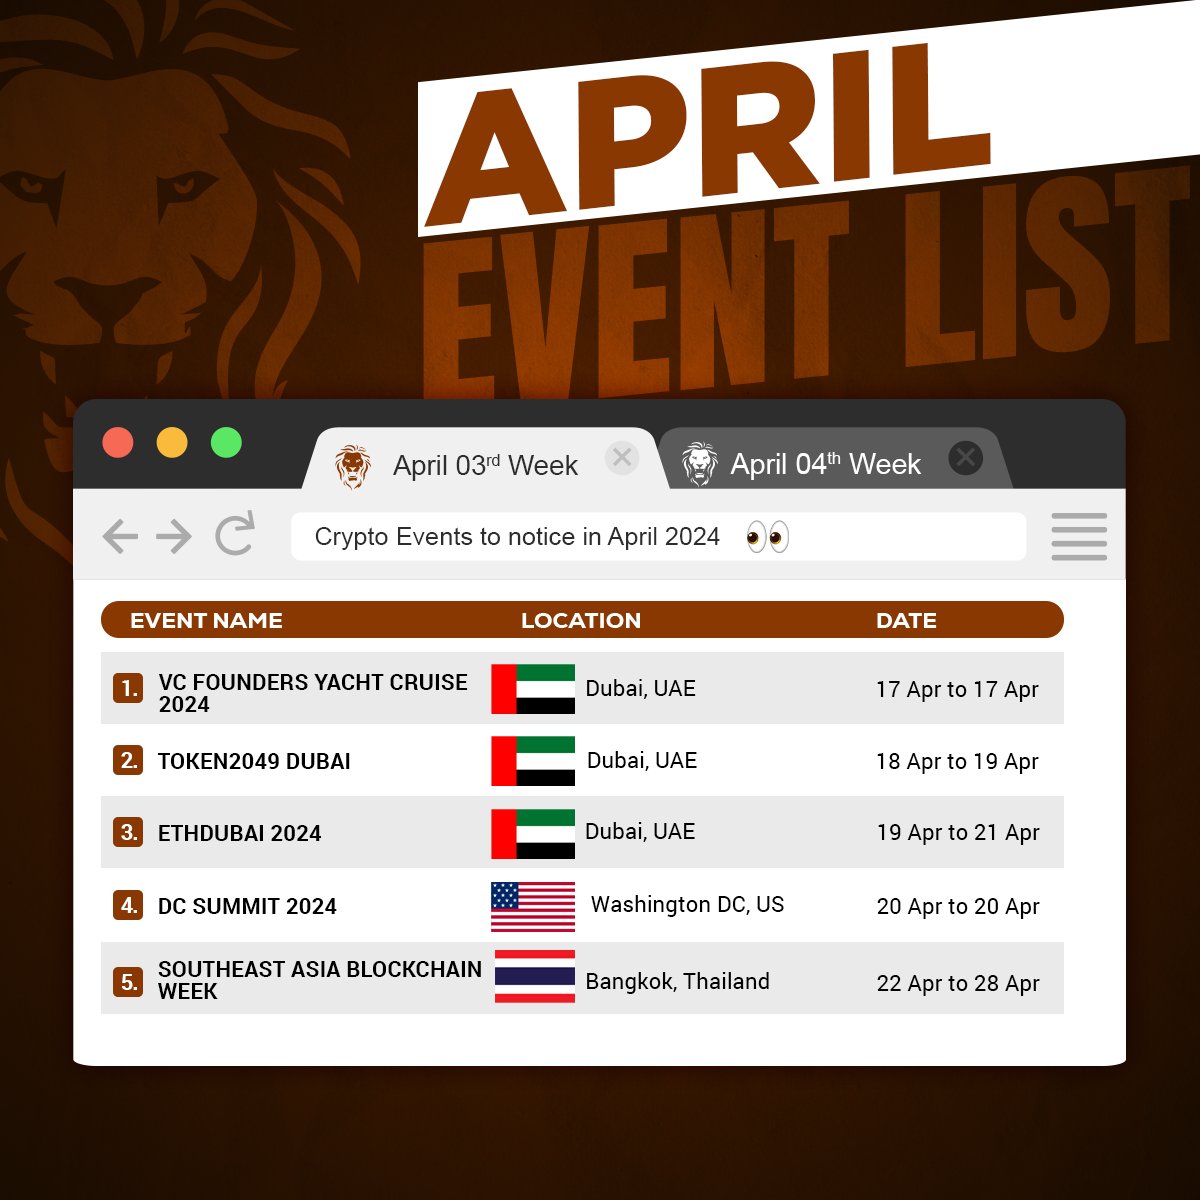 🔥#CryptoEvents To Notice In April🔥

1 #VCFOUNDERS YACHT CRUISE 2024
2 #TOKEN2049DUBAI
3 #ETHDUBAI2024
4 #DCSUMMIT2024
5 #SOUTHEASTASIA BLOCKCHAIN WEEK

📅Read More Events: coingabbar.com/en/coin-events…

#Event #CryptoEvent #cryptocurrency #blockchain #Conference #Web3 #Web3Event…